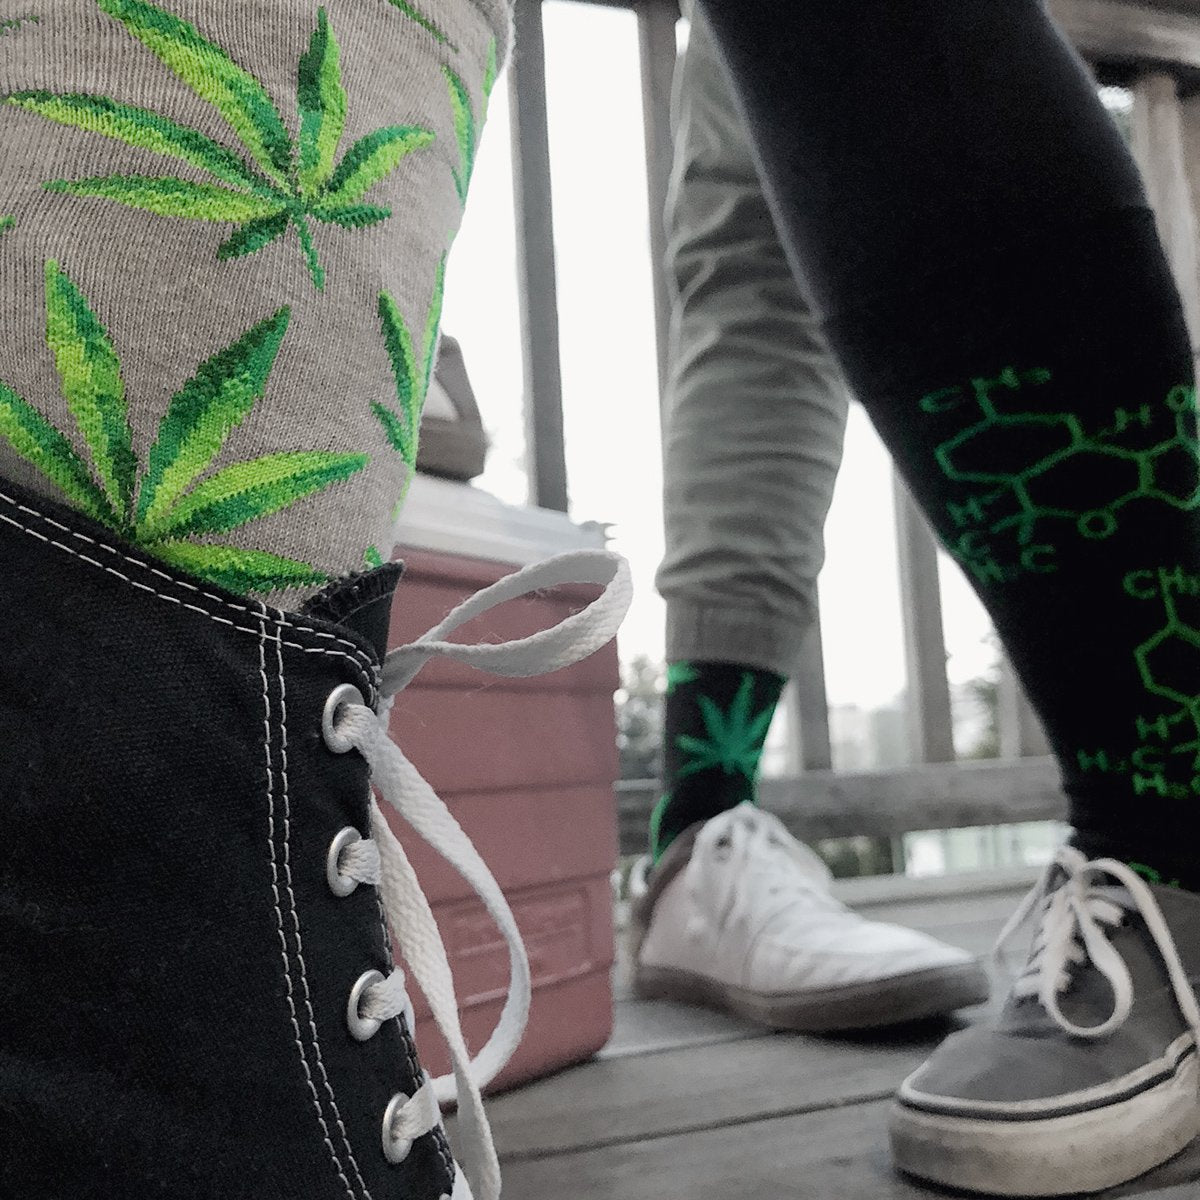 weed socks outfit